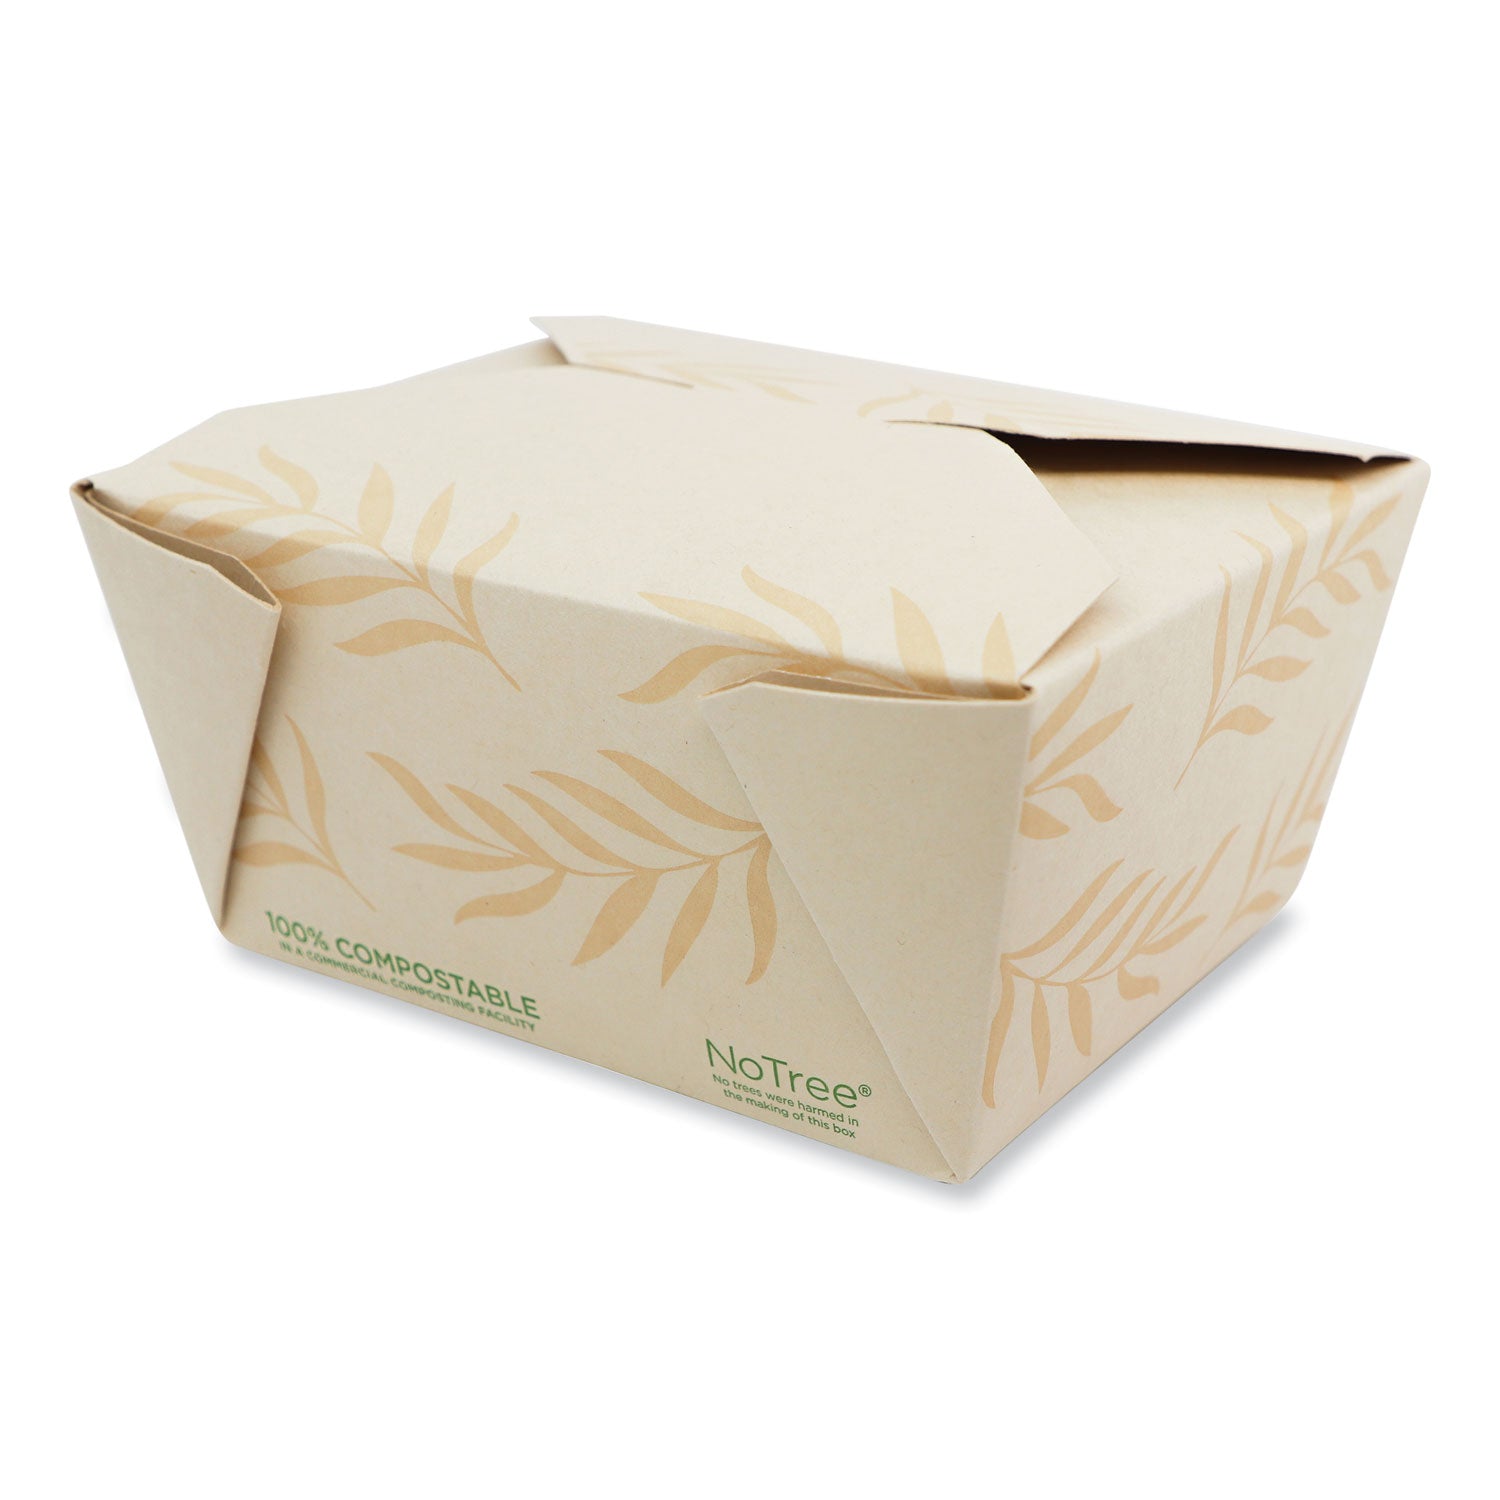 no-tree-folded-takeout-containers-26-oz-42-x-52-x-25-natural-sugarcane-450-carton_wortont1 - 1